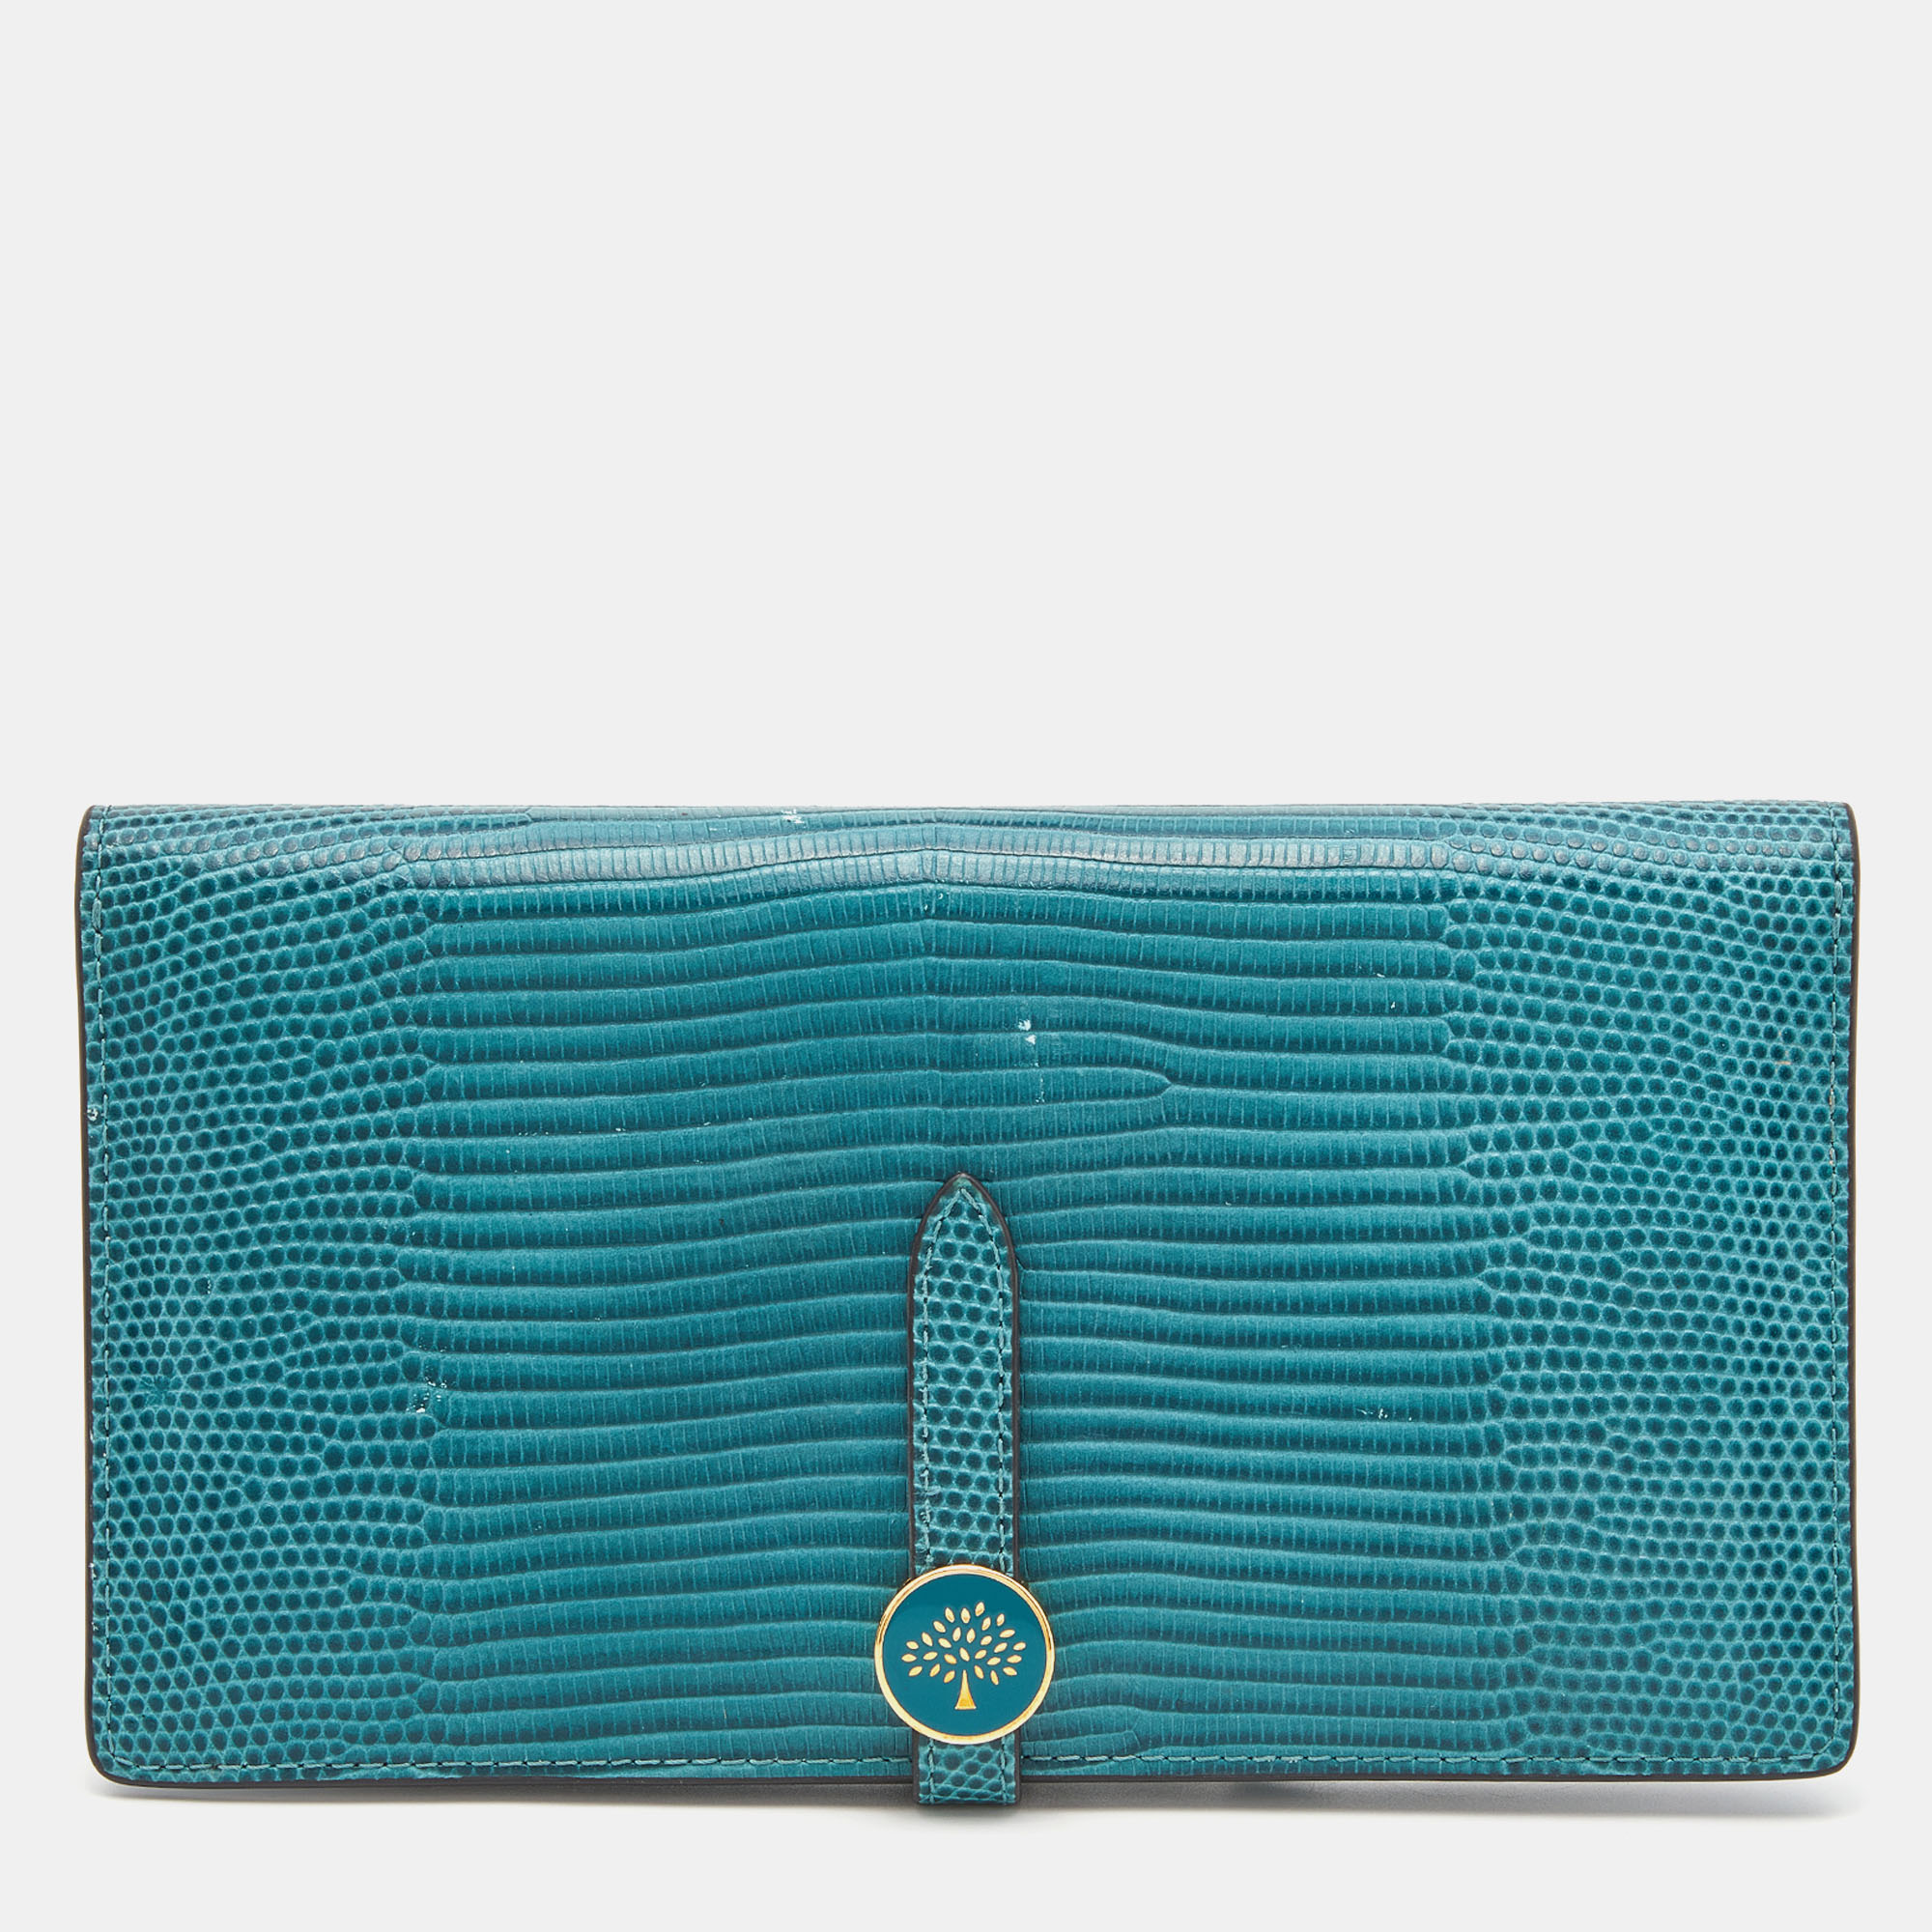 Mulberry Teal Lizard Embossed Leather Tree Long Wallet